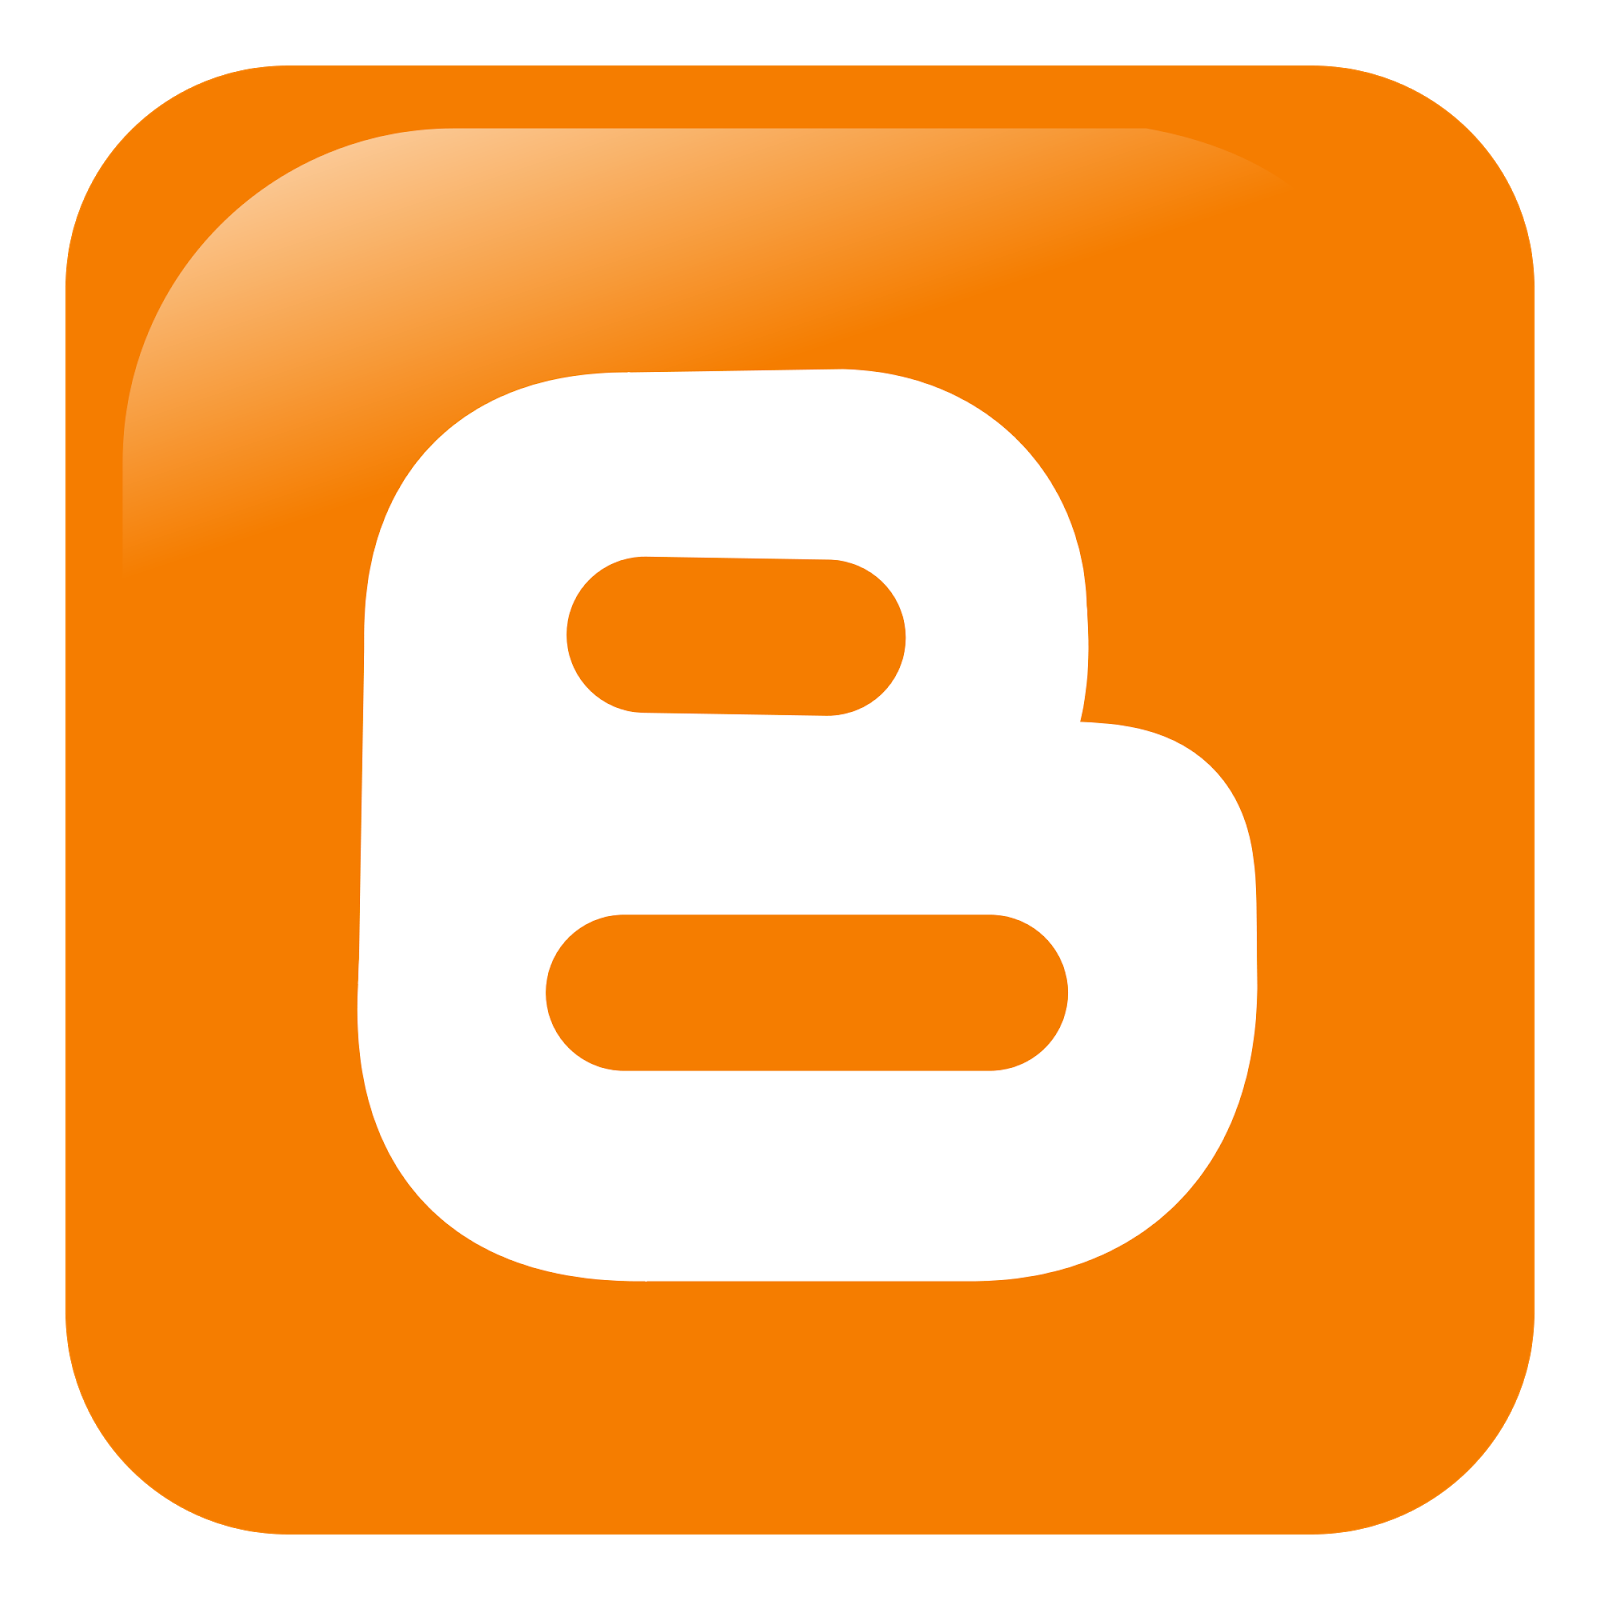 Logo for the formerly popular site called Blogger